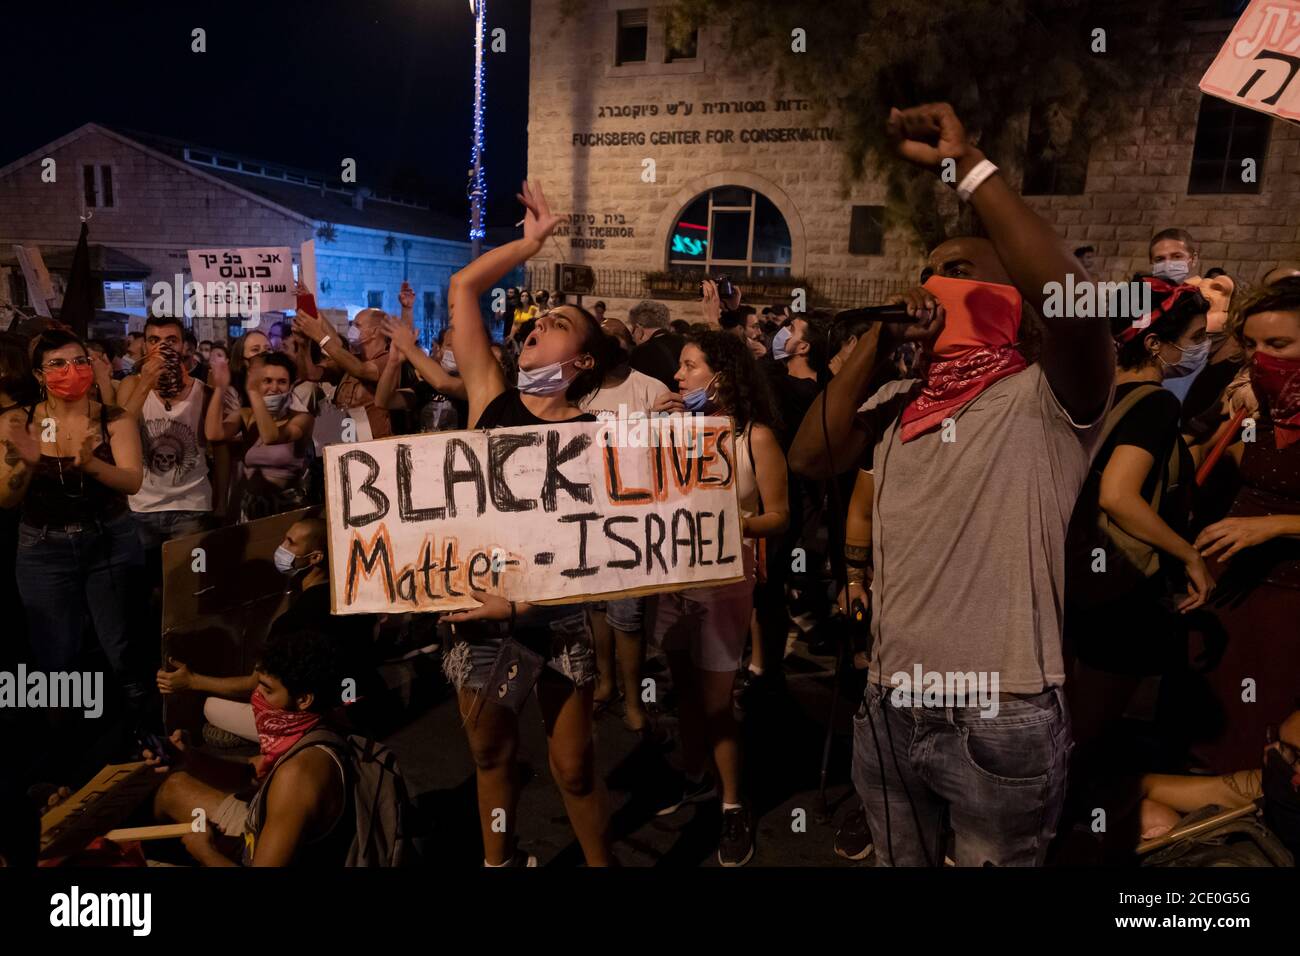 JERUSALEM, ISRAEL - AUGUST 29: A demonstrator holds a sign 'Black Lives Matter - Israel' as a member of the Beta Israel community also known as Ethiopian Jews names the names of Ethiopian Jews who were killed by police in recent years during a mass demonstration attended by over 25000 people as part of ongoing demonstrations against Prime Minister Benjamin Netanyahu over his indictment on corruption charges and handling of the coronavirus pandemic near the Prime Minister's official residence on August 29, 2020 in Jerusalem, Israel. A wave of anti-Netanyahu protests has swept Israel over the su Stock Photo